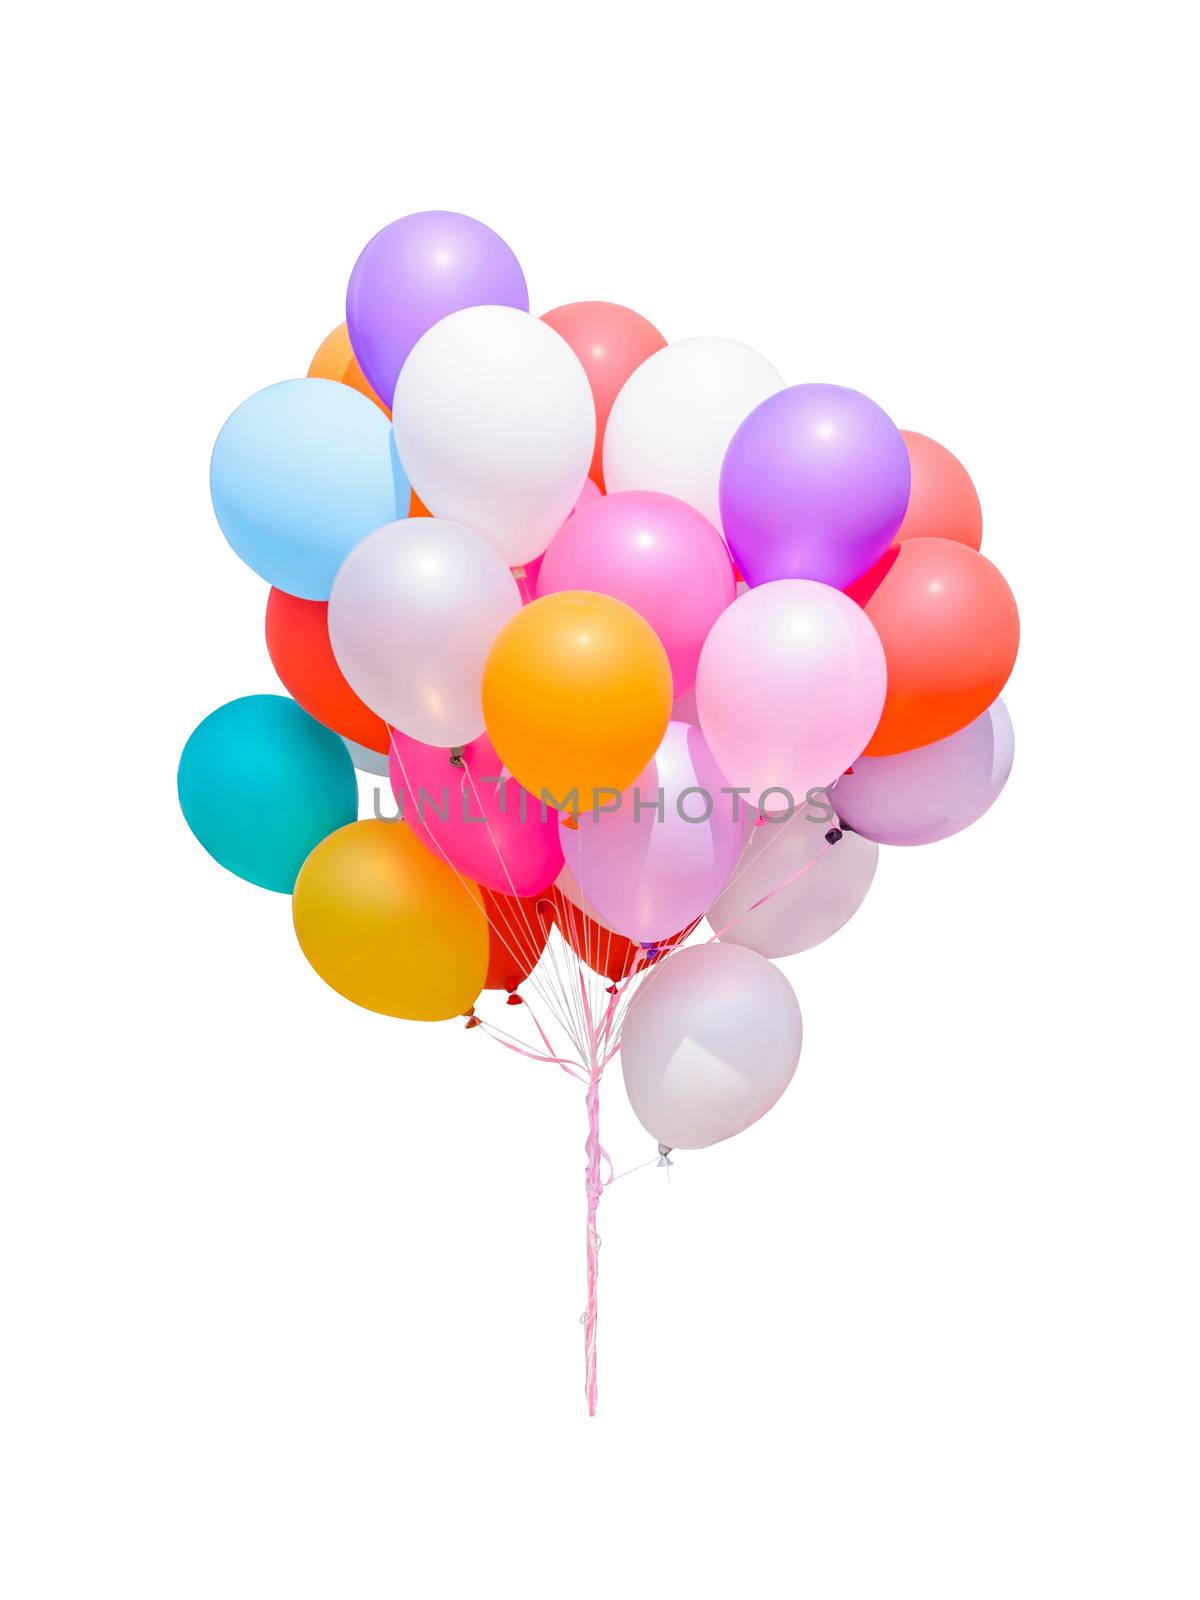 Colorful balloons isolated by NuwatPhoto